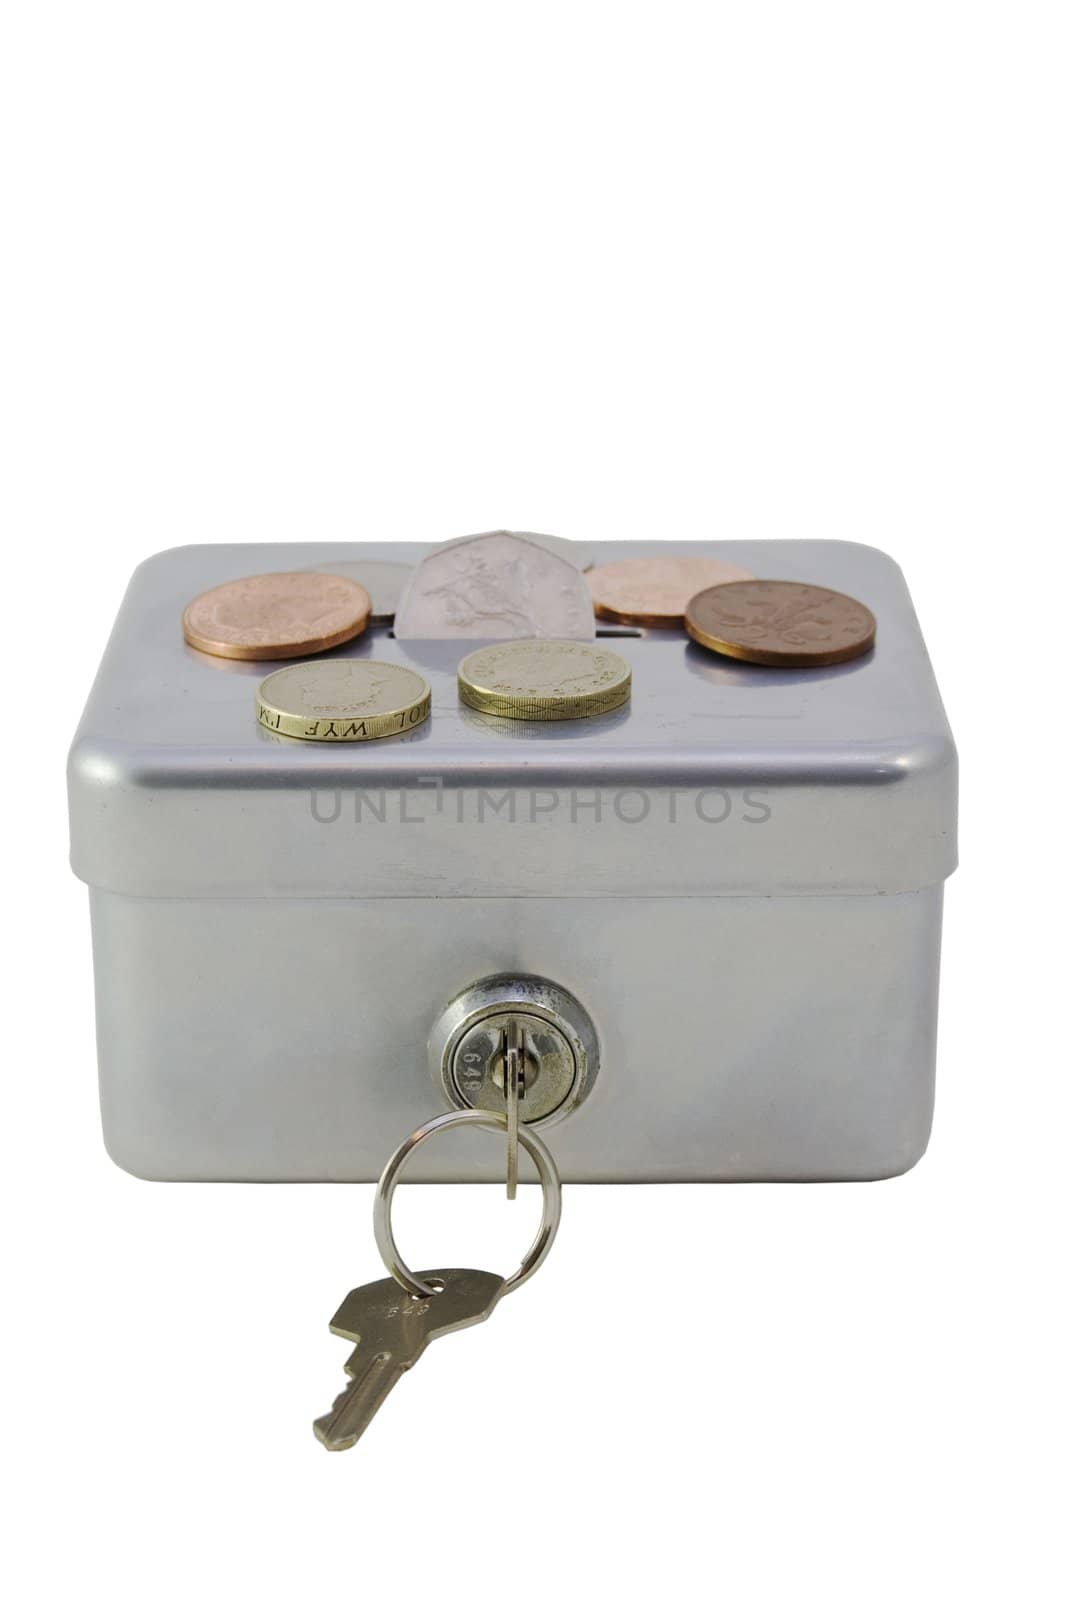 A lockable silver money box closed with some money of top of it